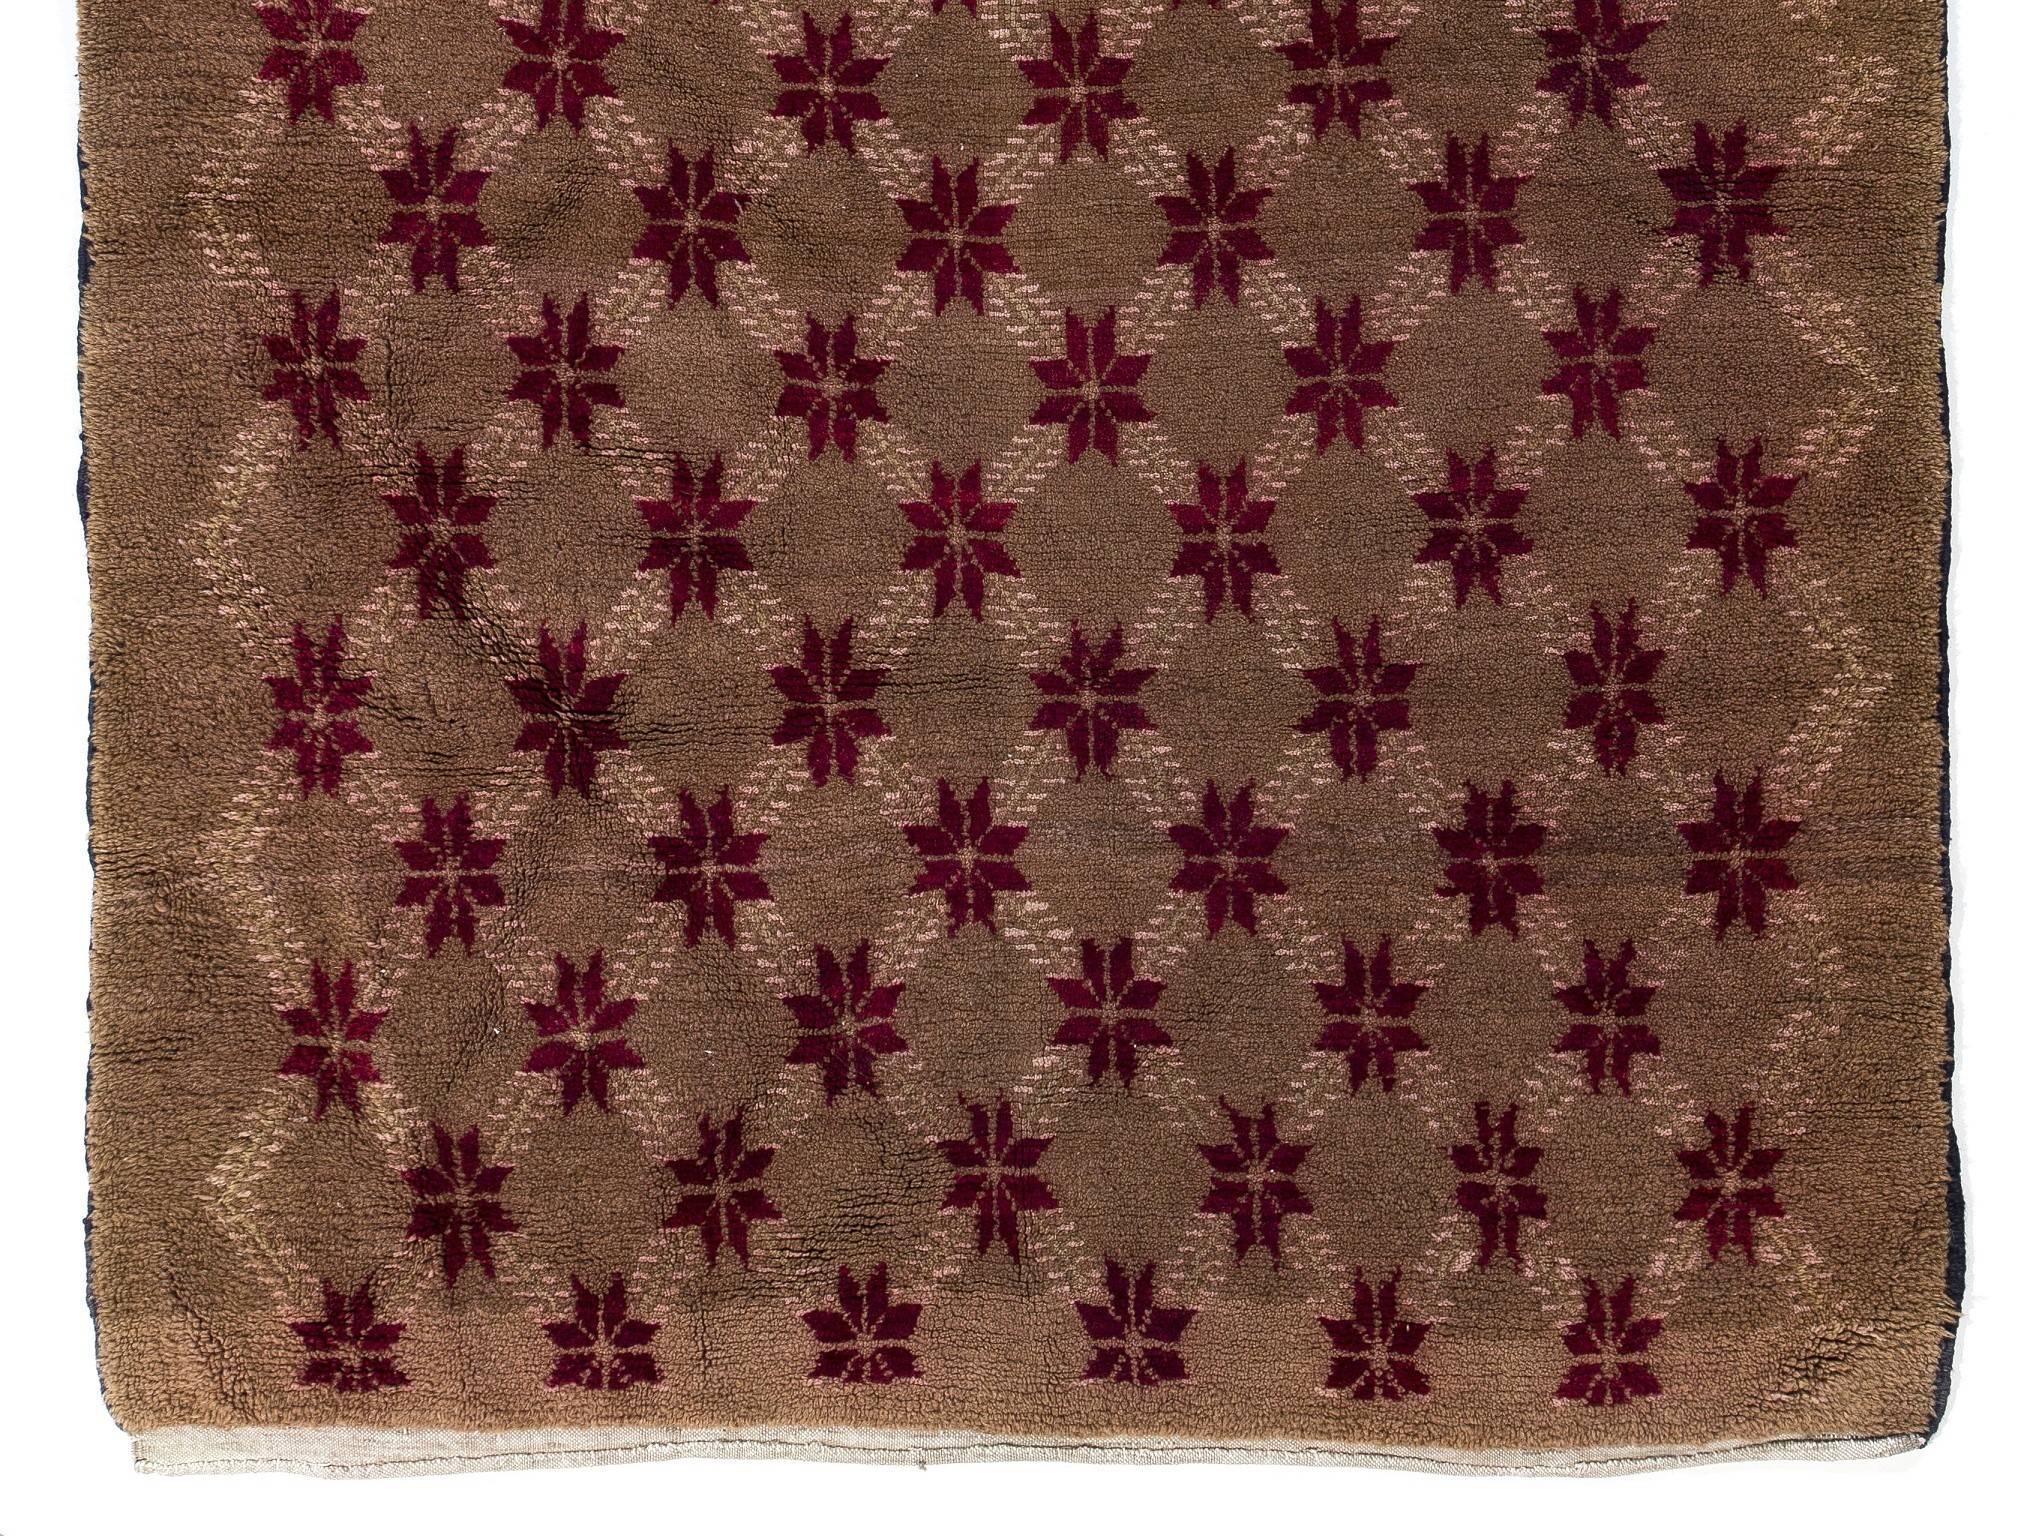 This unique vintage Central Anatolian rug is quite striking with its overall floral lattice design and its color story. The contrast between the latte background and the crimson red florals along with the ivory lattices made of dainty little leaves